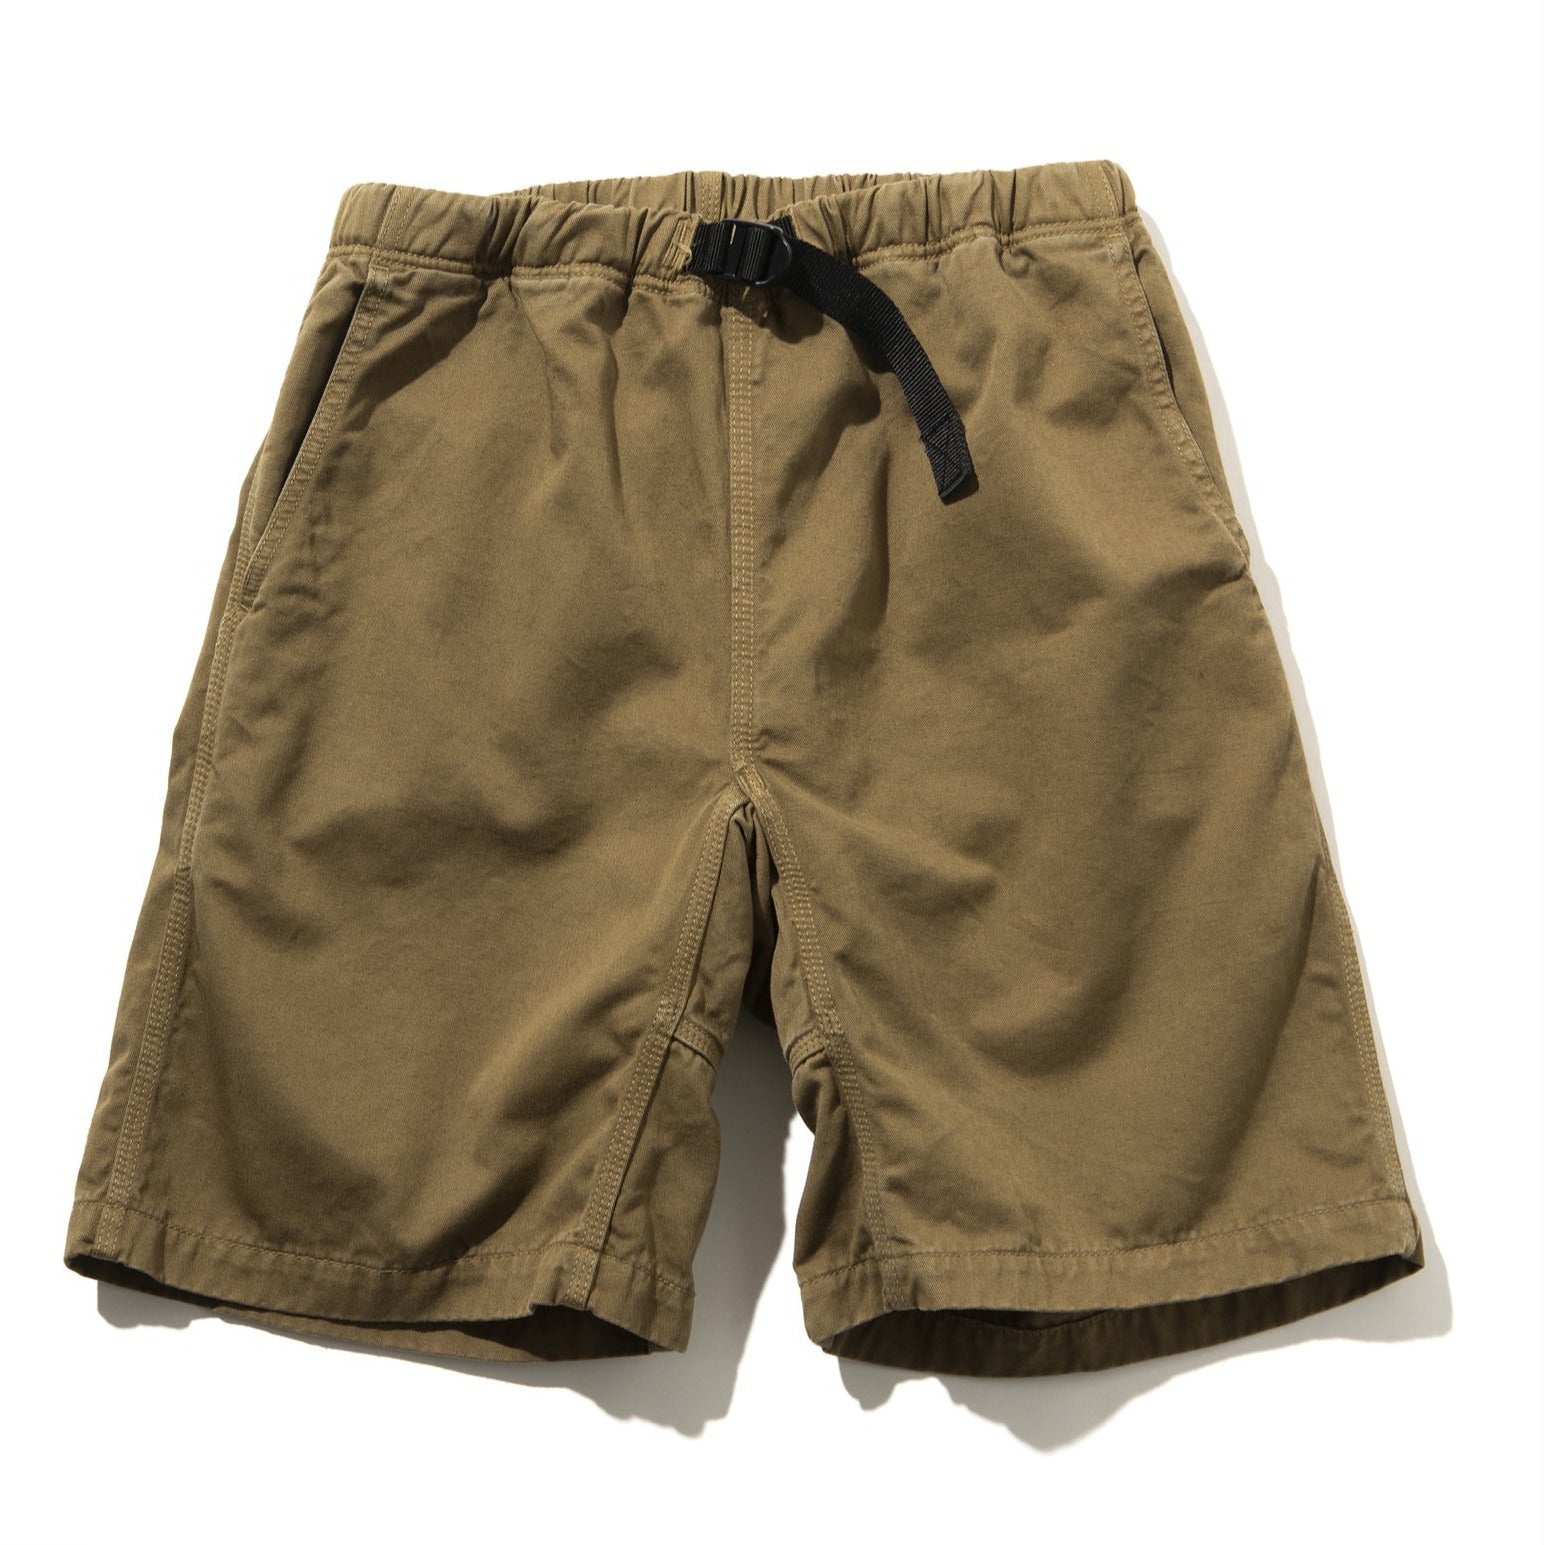 CLIMBERS' SHORTS (OVER-DYED) – The Real McCoy's